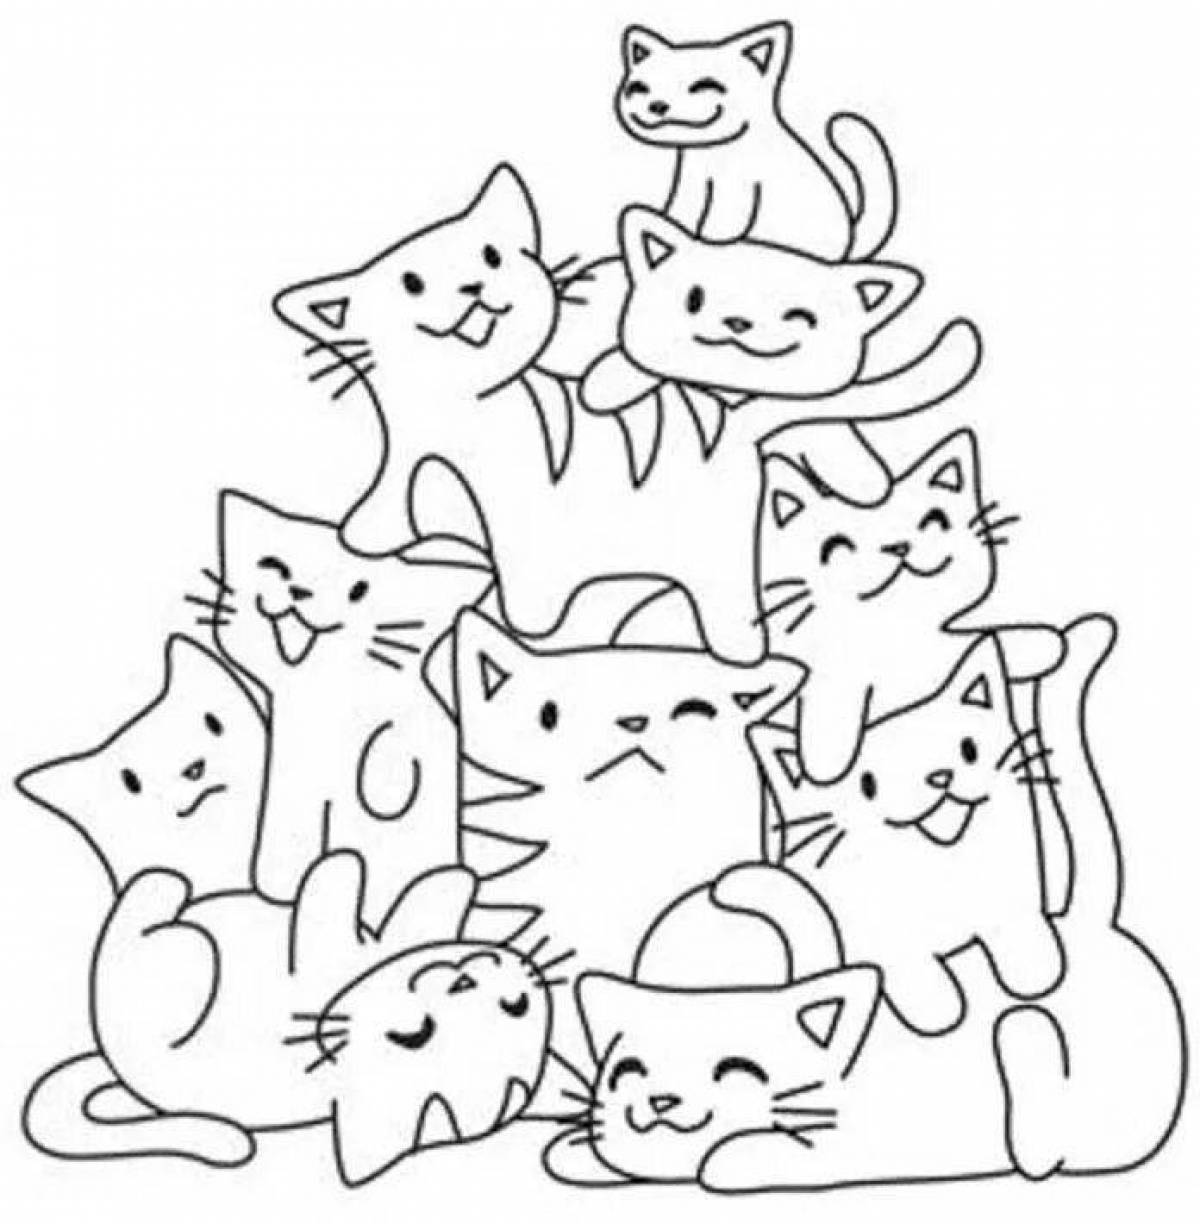 Amazing coloring book with lots of cats